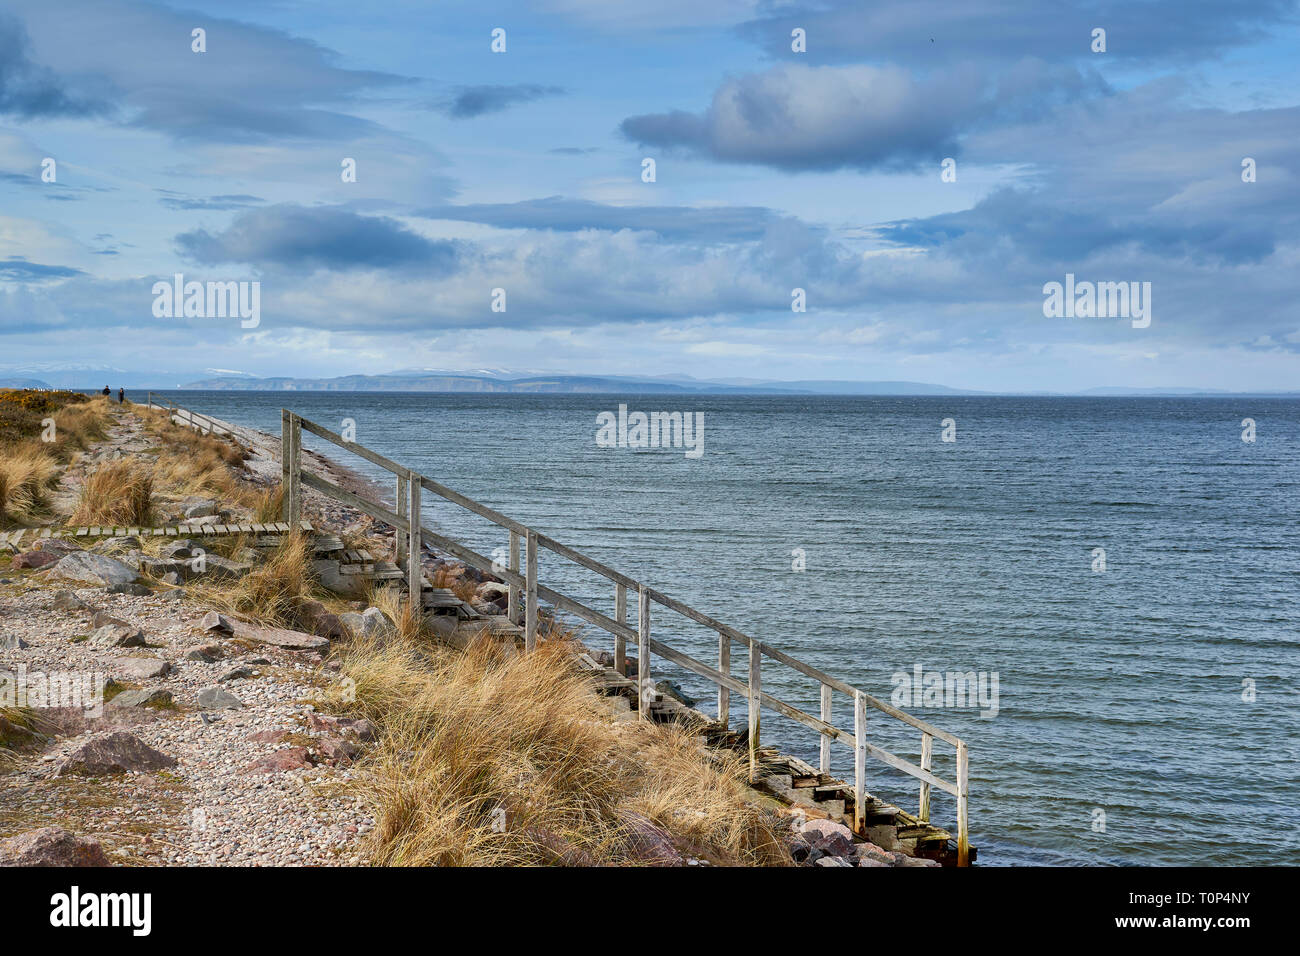 FINDHORN BEACH MORAY FIRTH SCOTLAND WOODEN STEPS LEADING INTO THE SEA THE BLACK ISLE BEYOND AND SNOW ON THE MOUNTAINS Stock Photo